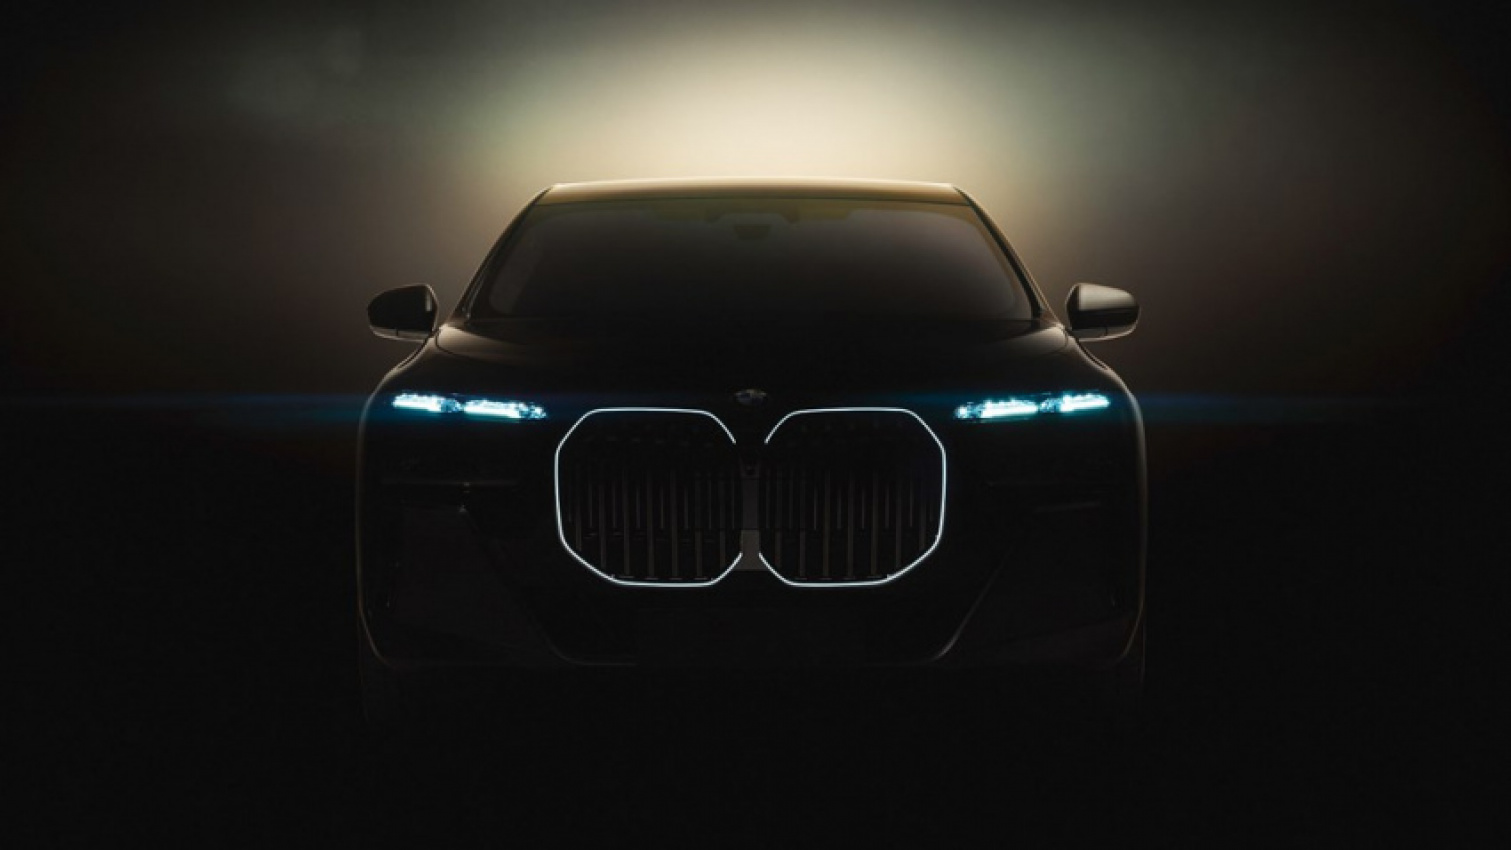 autos, bmw, cars, vnex, next-generation bmw 7 series teased ahead of 2022 launch